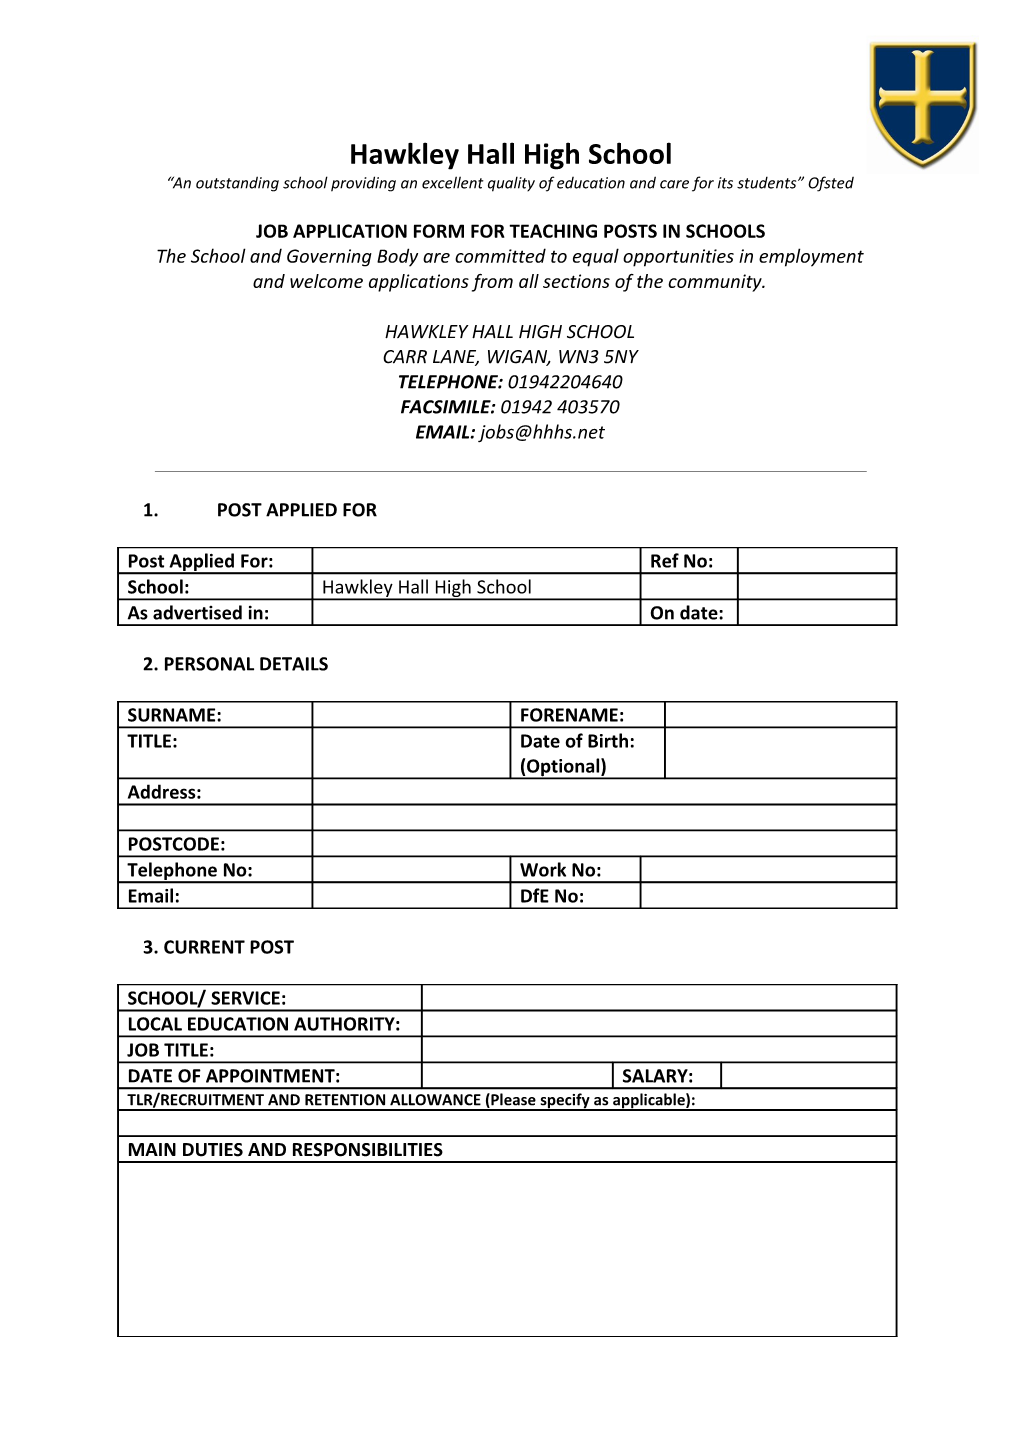 Job Application Form for Teaching Posts in Schools